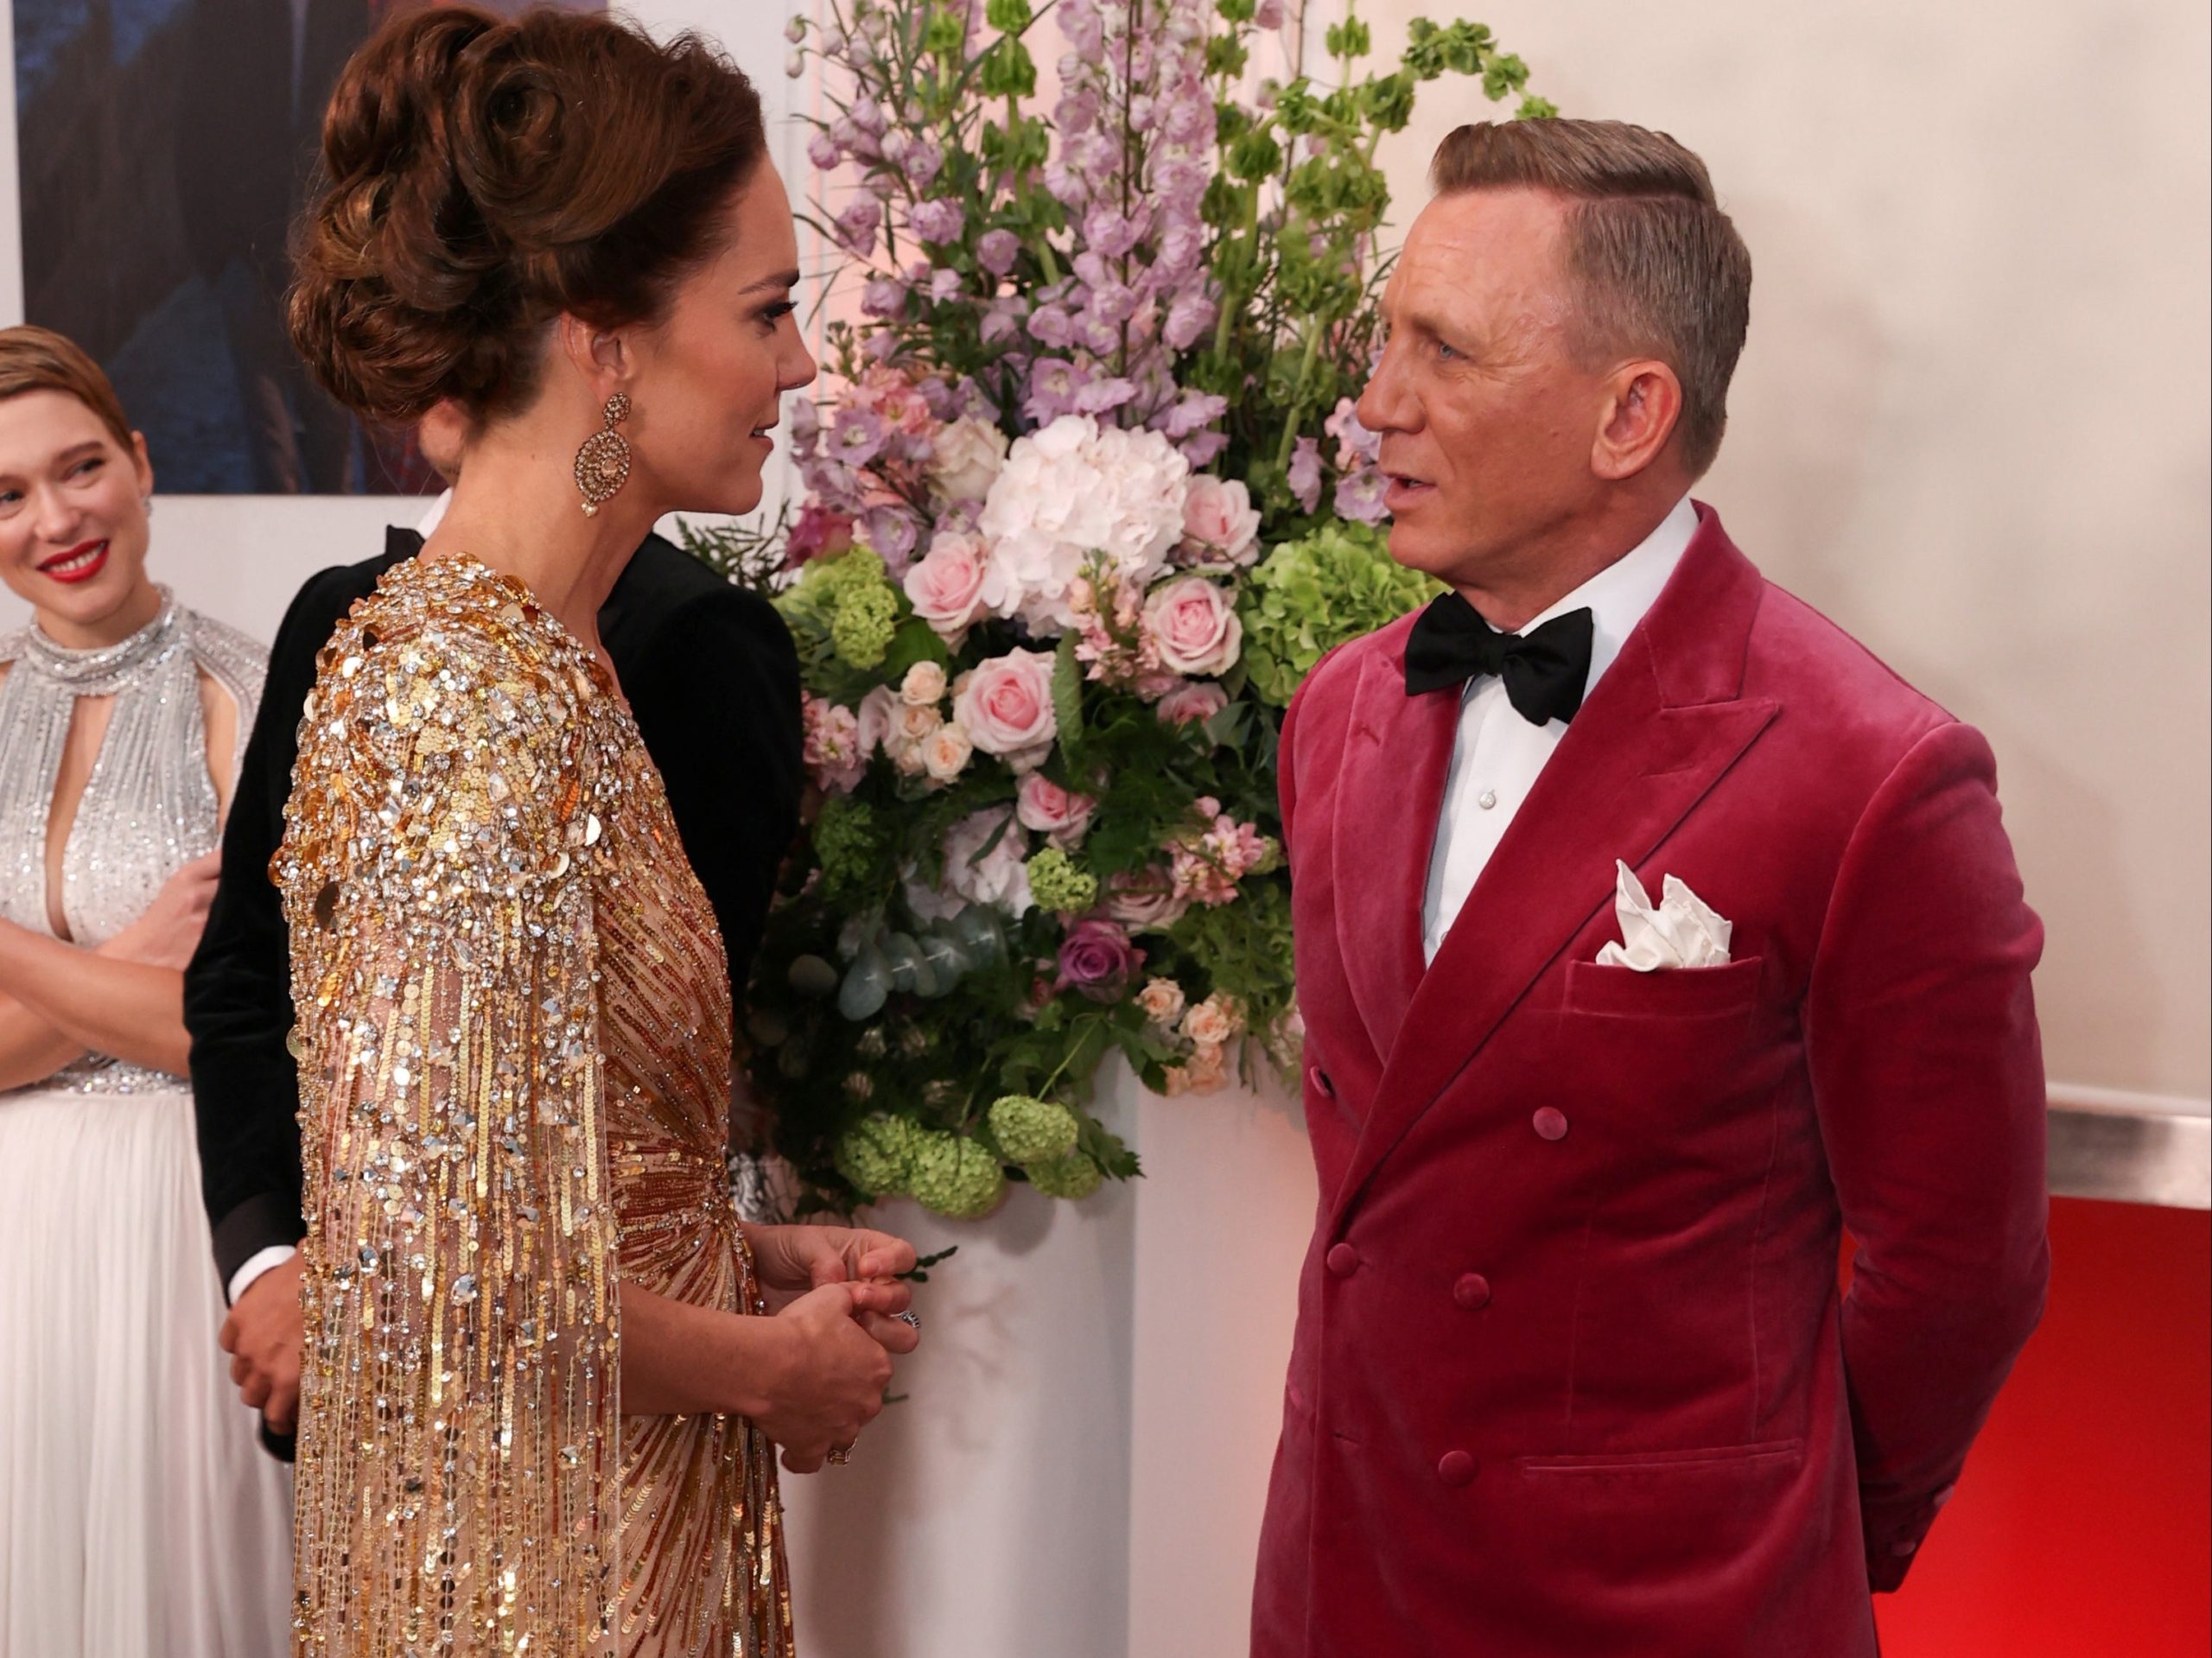 Daniel Craig and Kate Middleton make bold fashion statements at ‘No Time To Die’ premiere